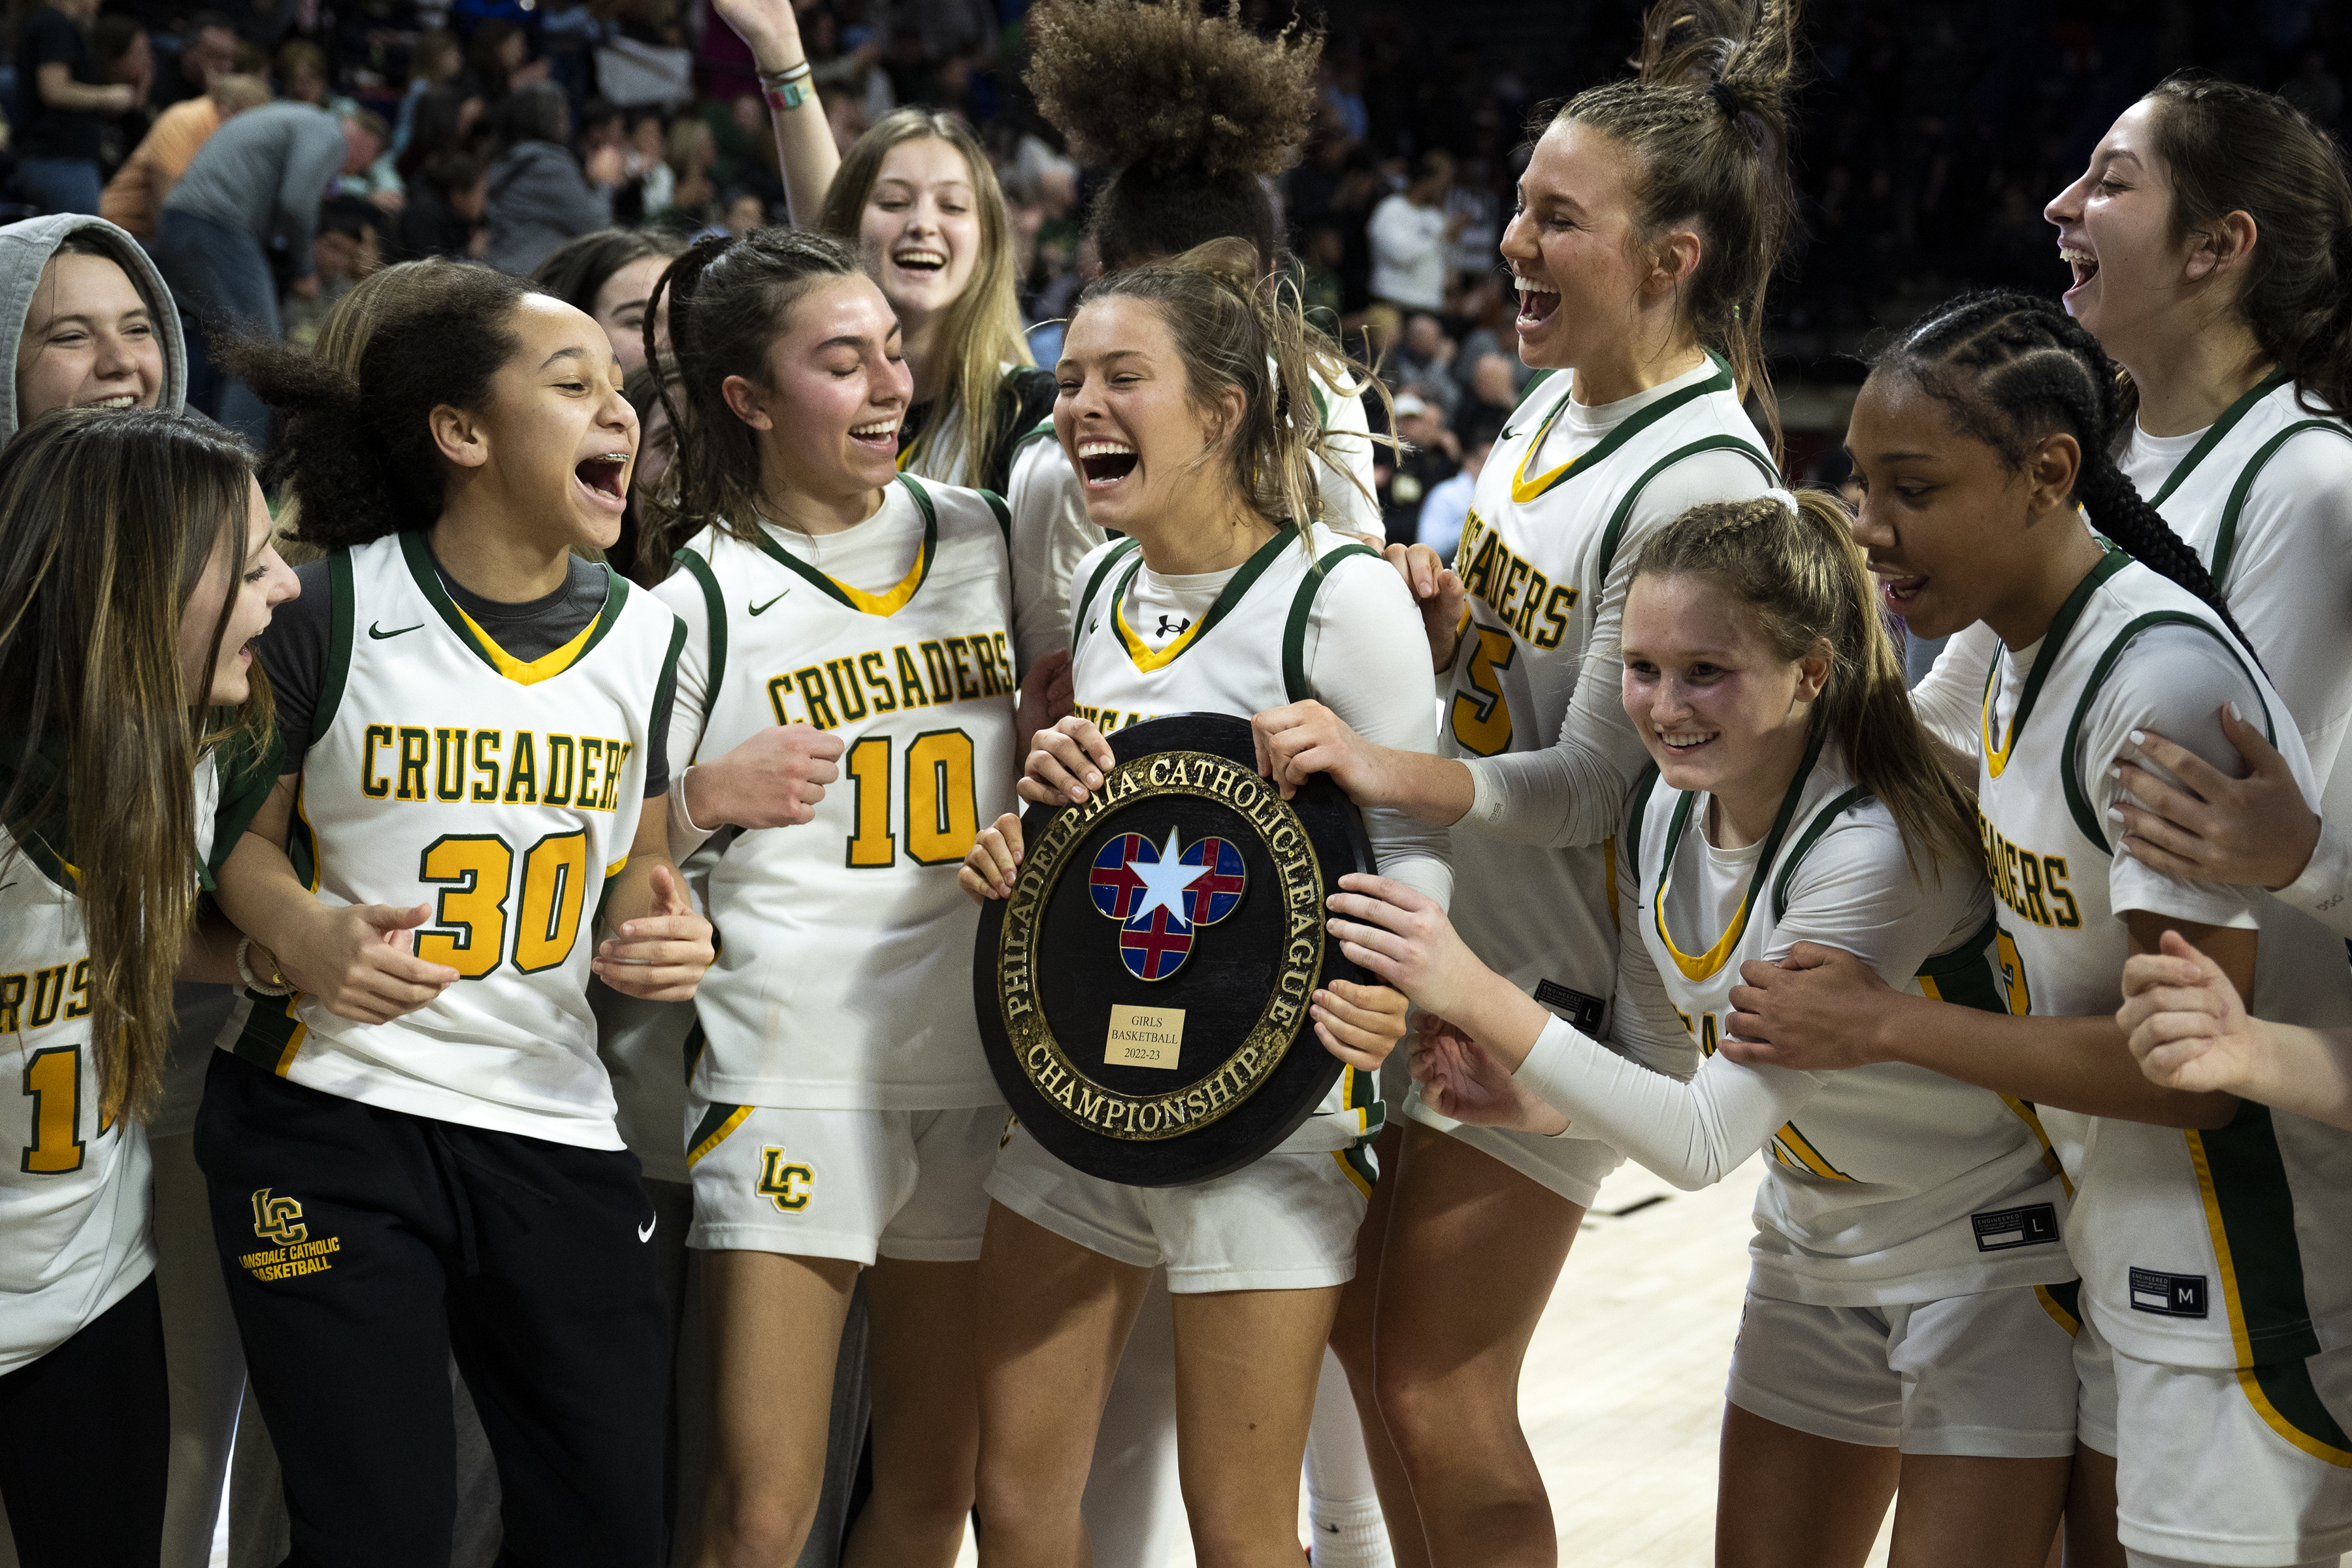 Lansdale Catholic girls basketball earns first Philly Catholic League title thanks to Olivia Boccella three